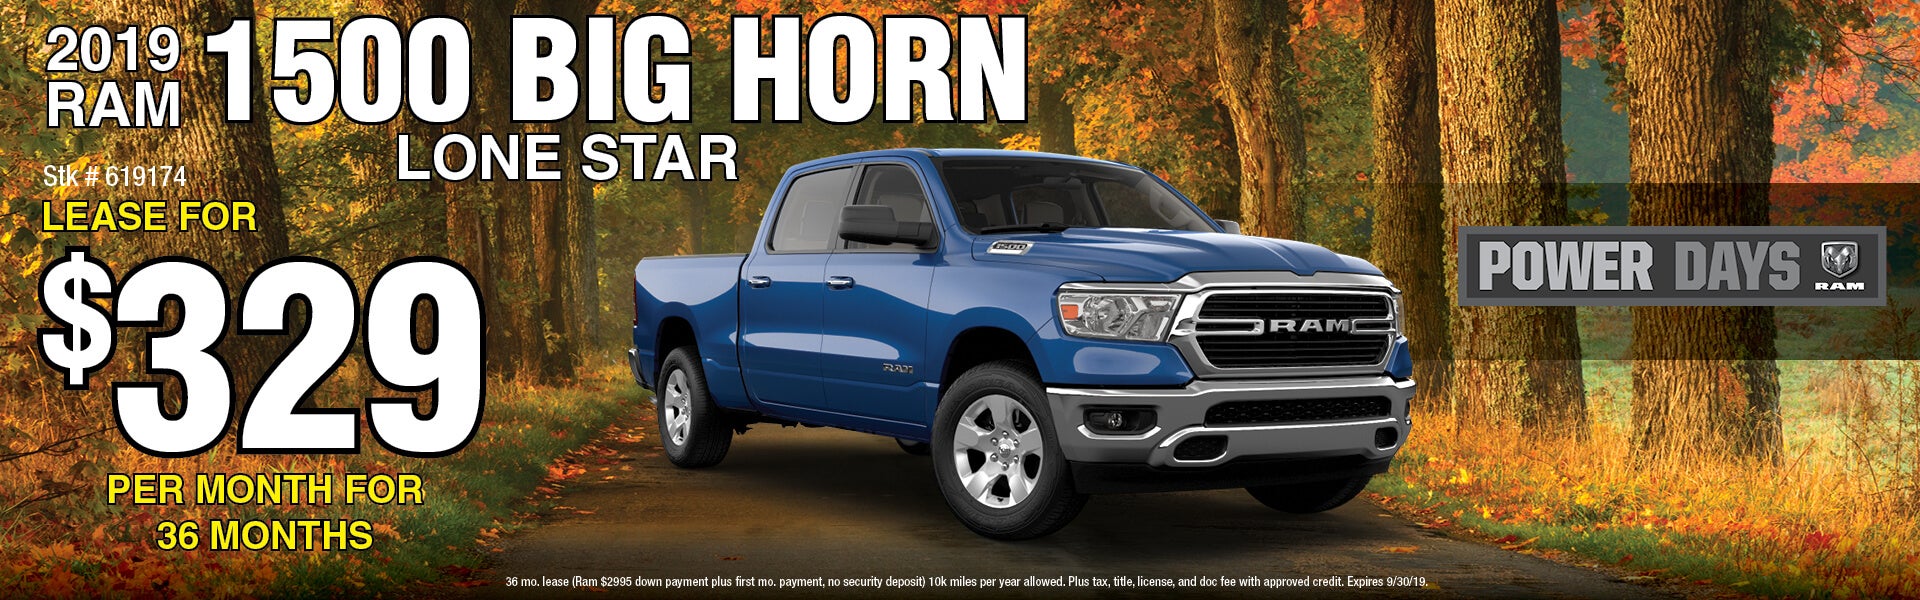 Lease a 2019 Ram 1500 Big Horn for $329/mo for 36 mo